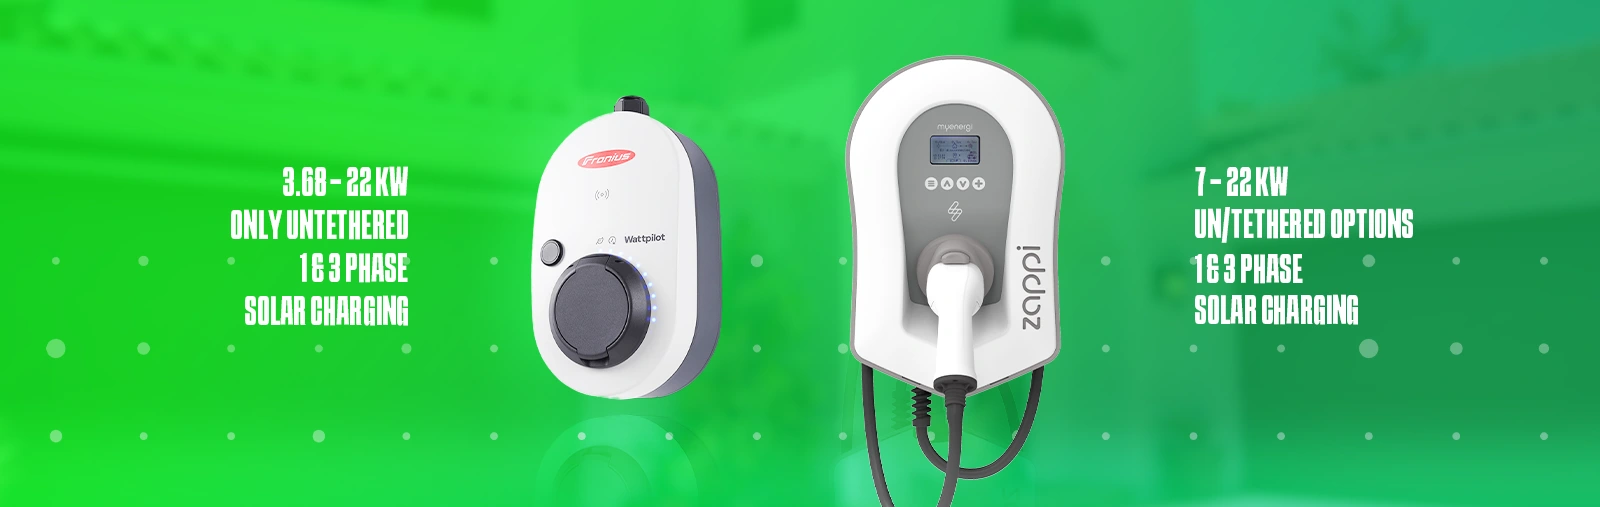 Is the zappi or wattpilot better? solar ev chargers